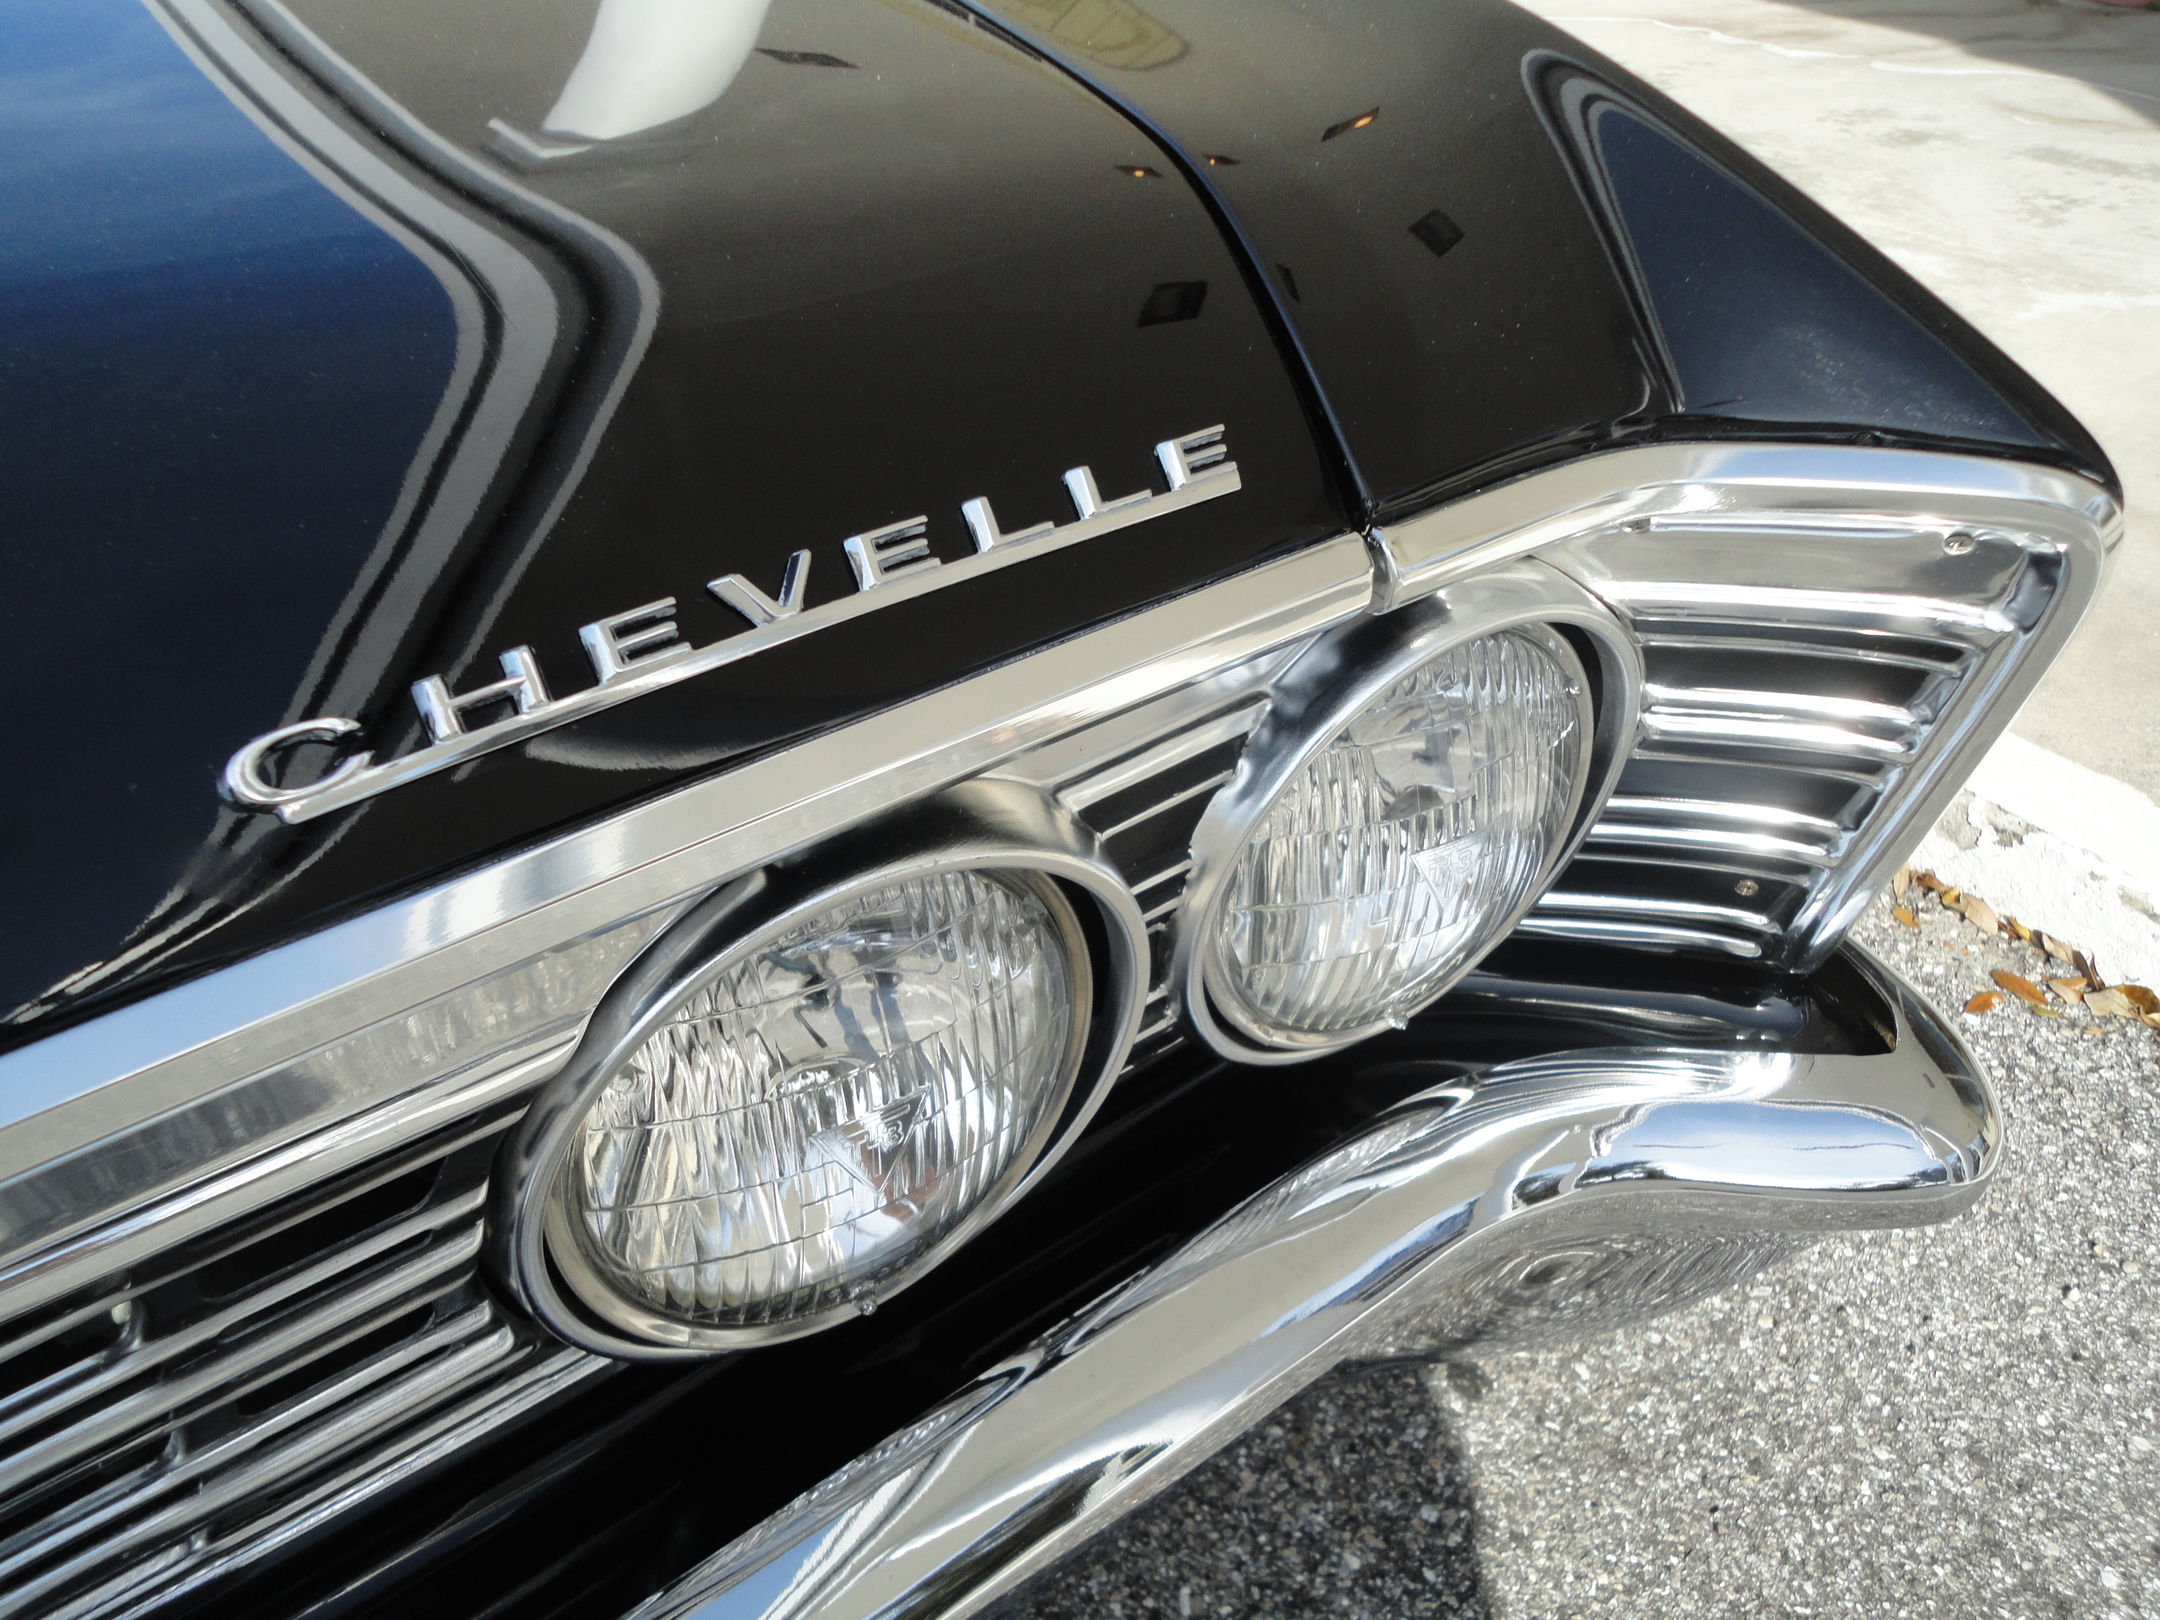 1967, Chevrolet, Chevelle, Ss, Convertible, Muscle, Classic, S s Wallpaper